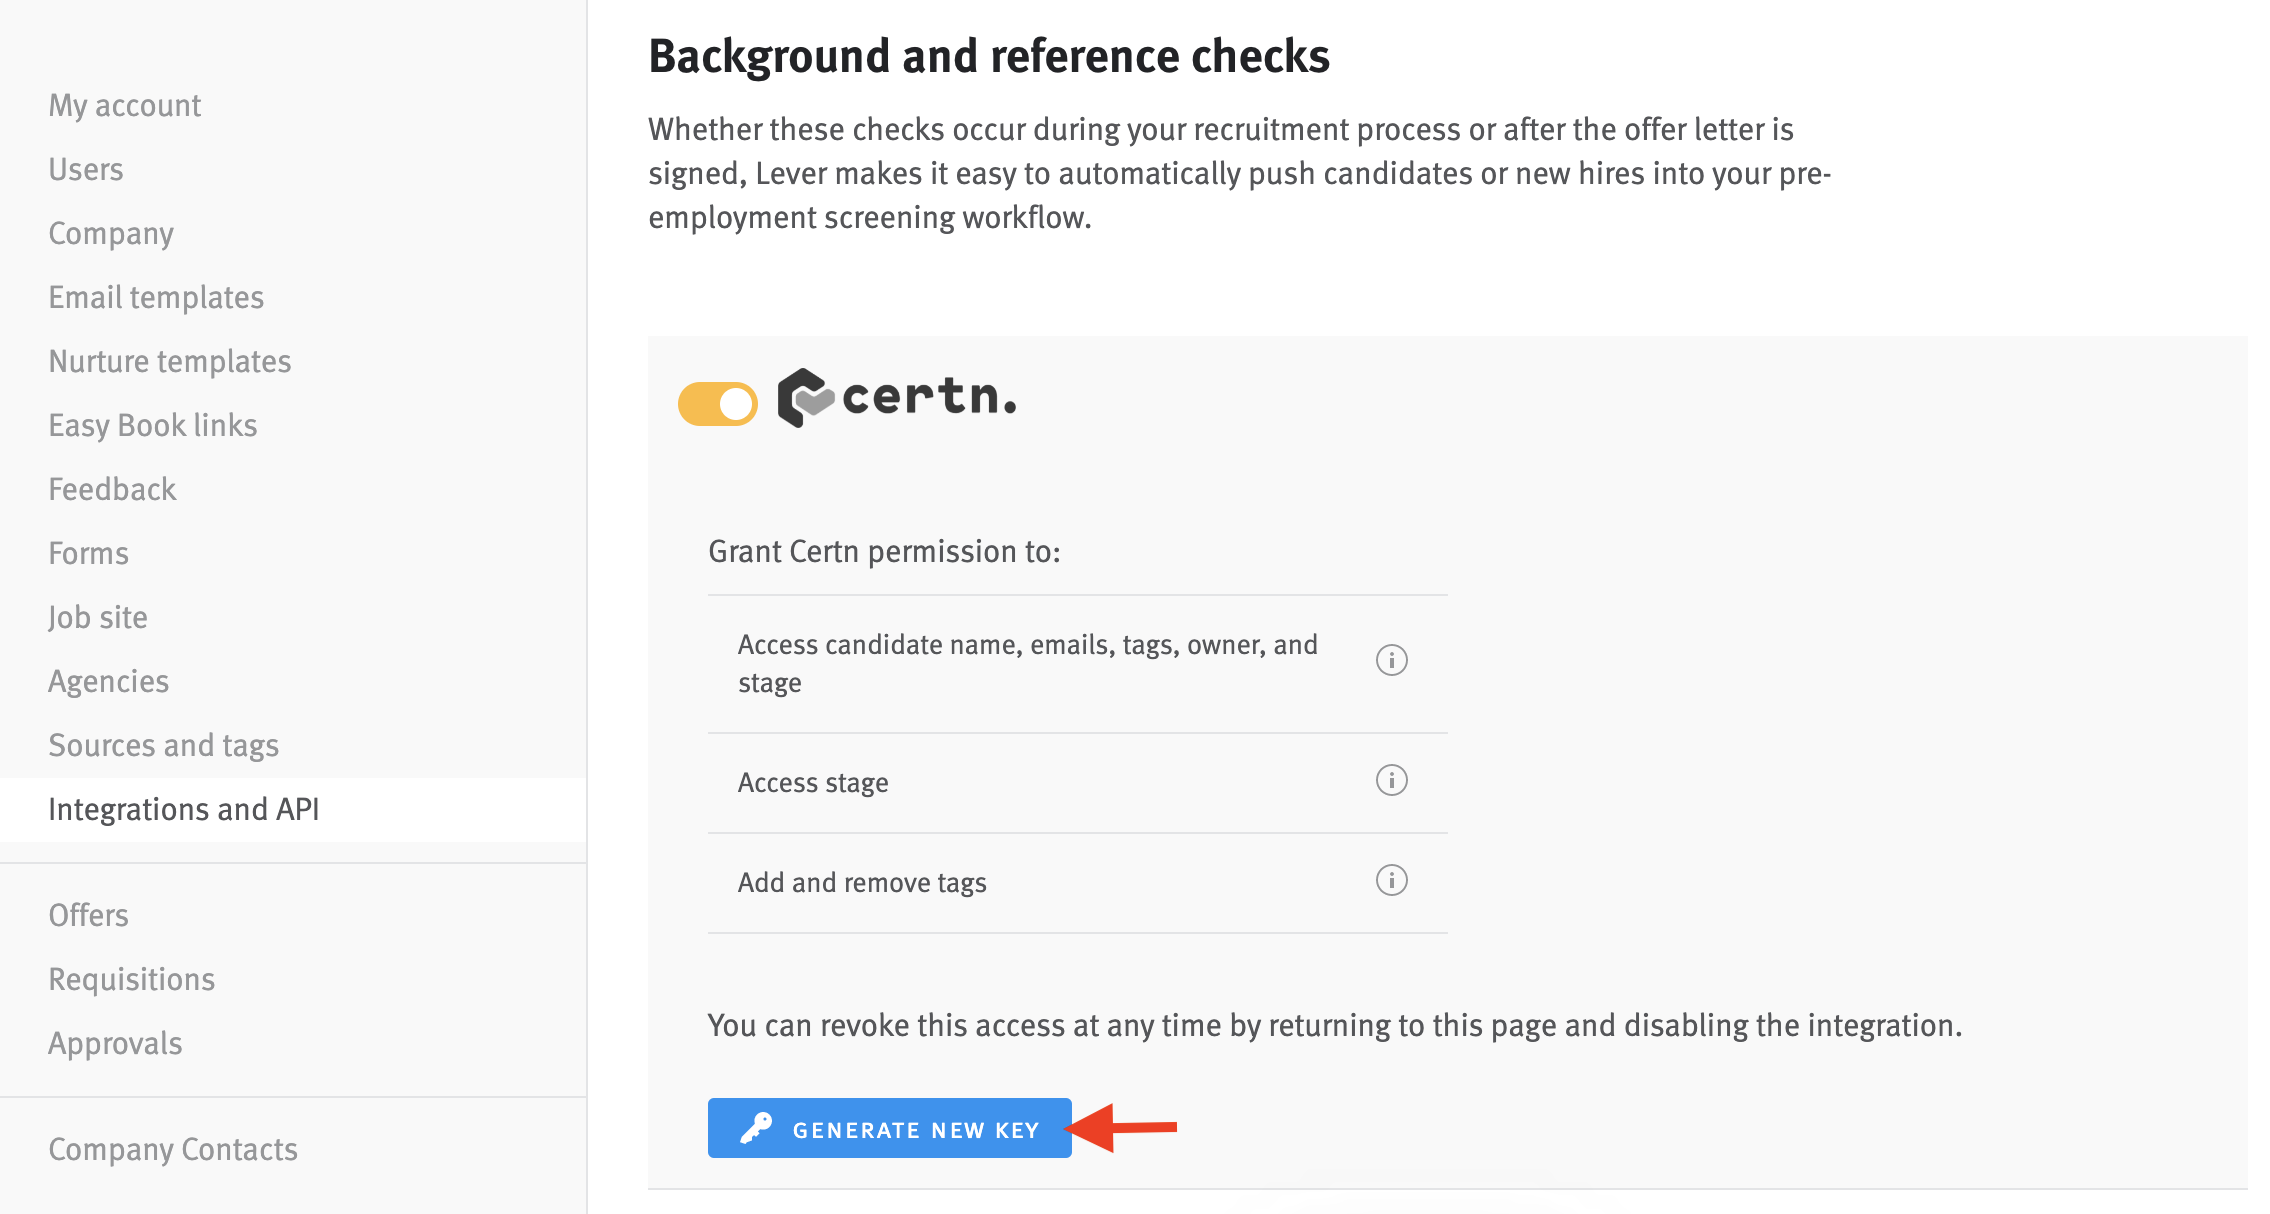 Certn integration card in Background and reference checks integration list in Lever Settings.